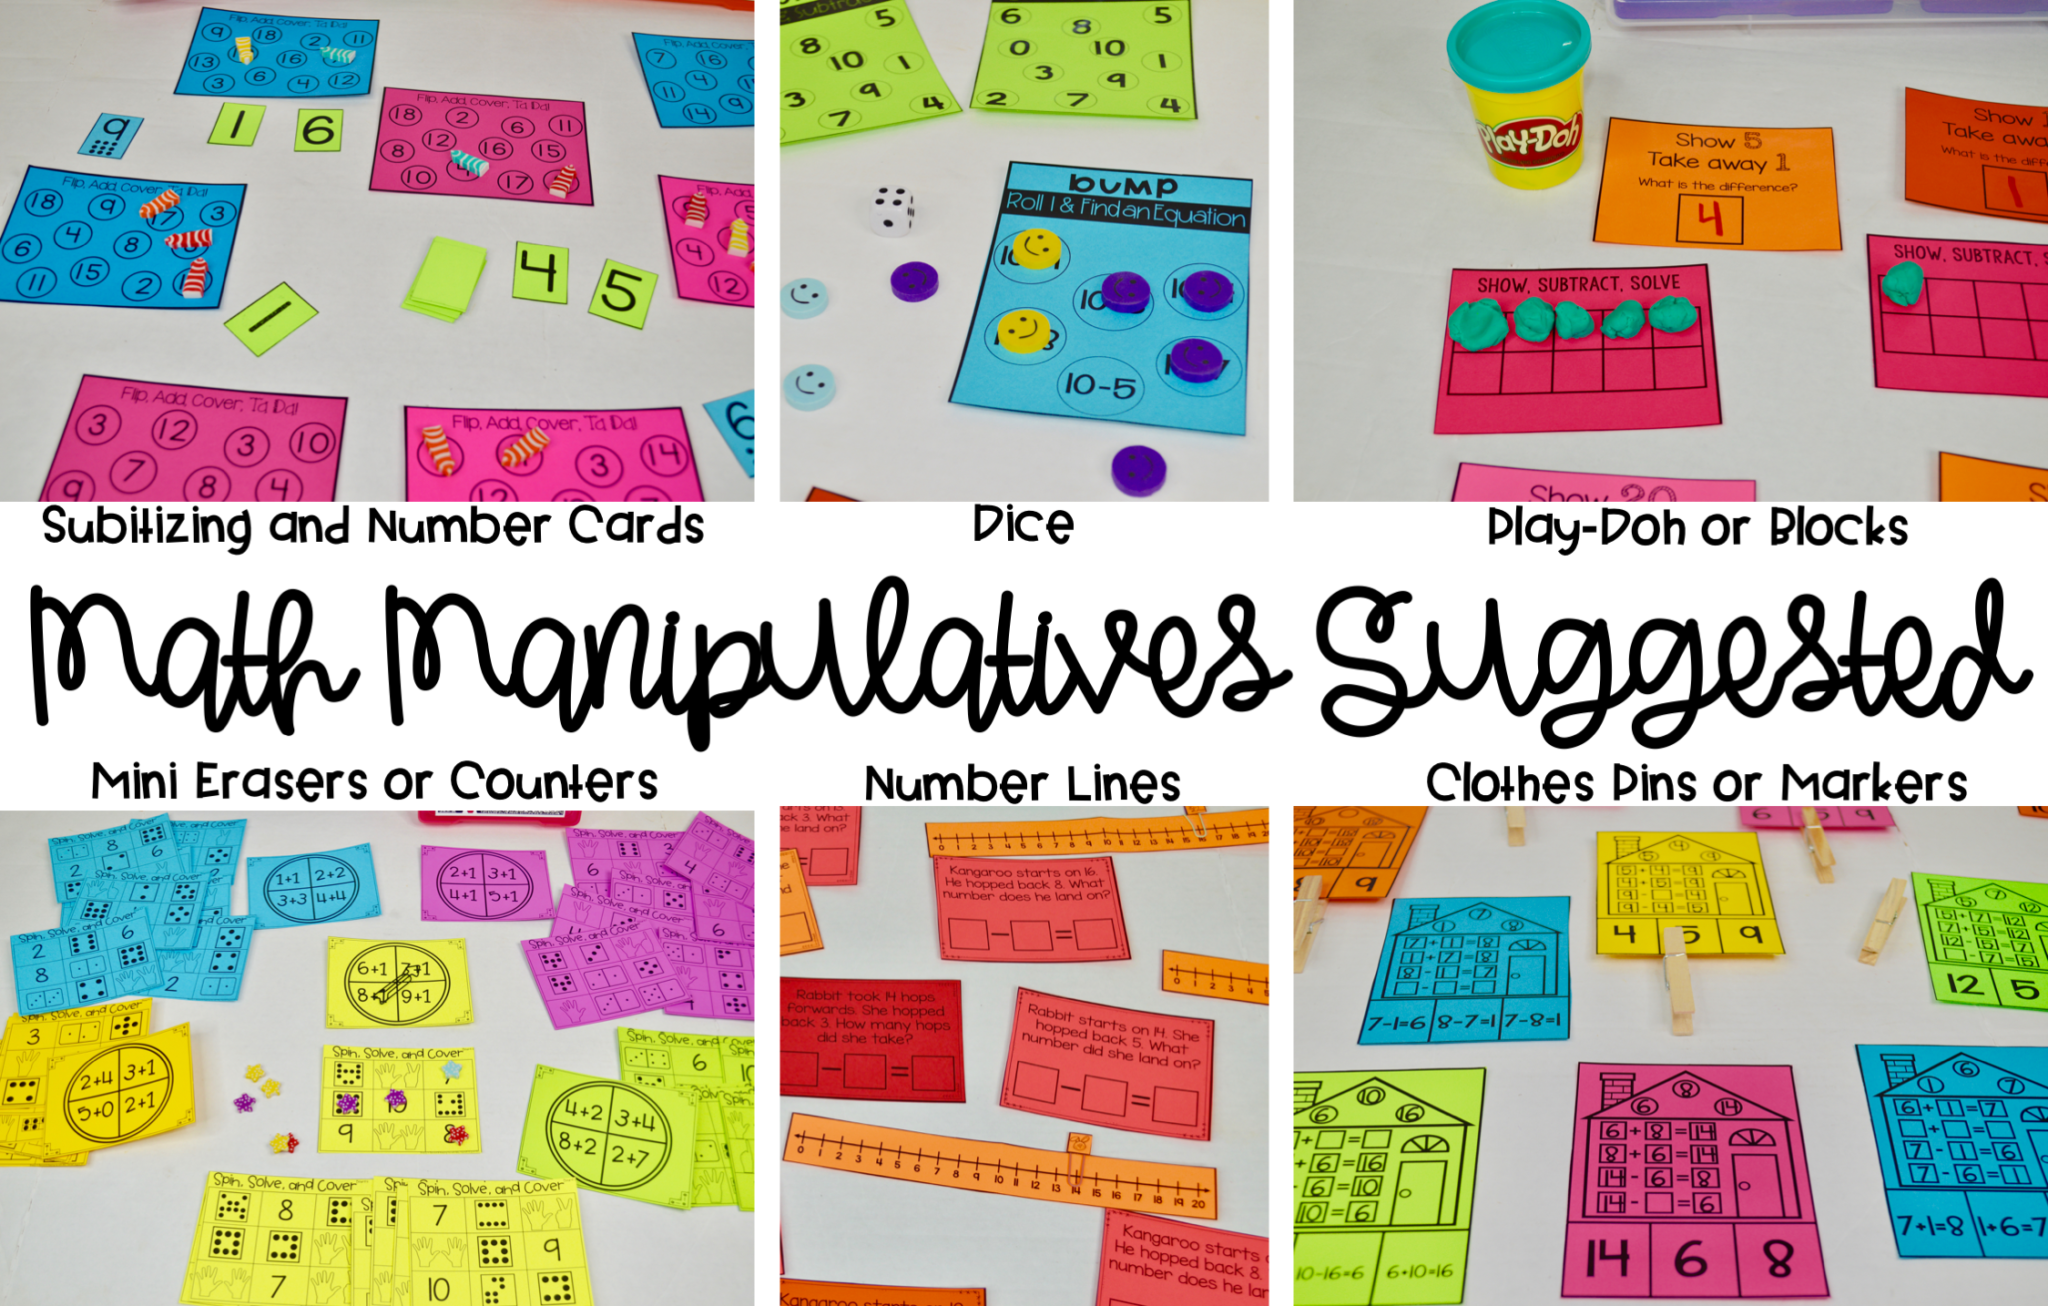 math interventions - addition games - subtraction games - numbers 0-20 addition and subtraction - math intervention activities